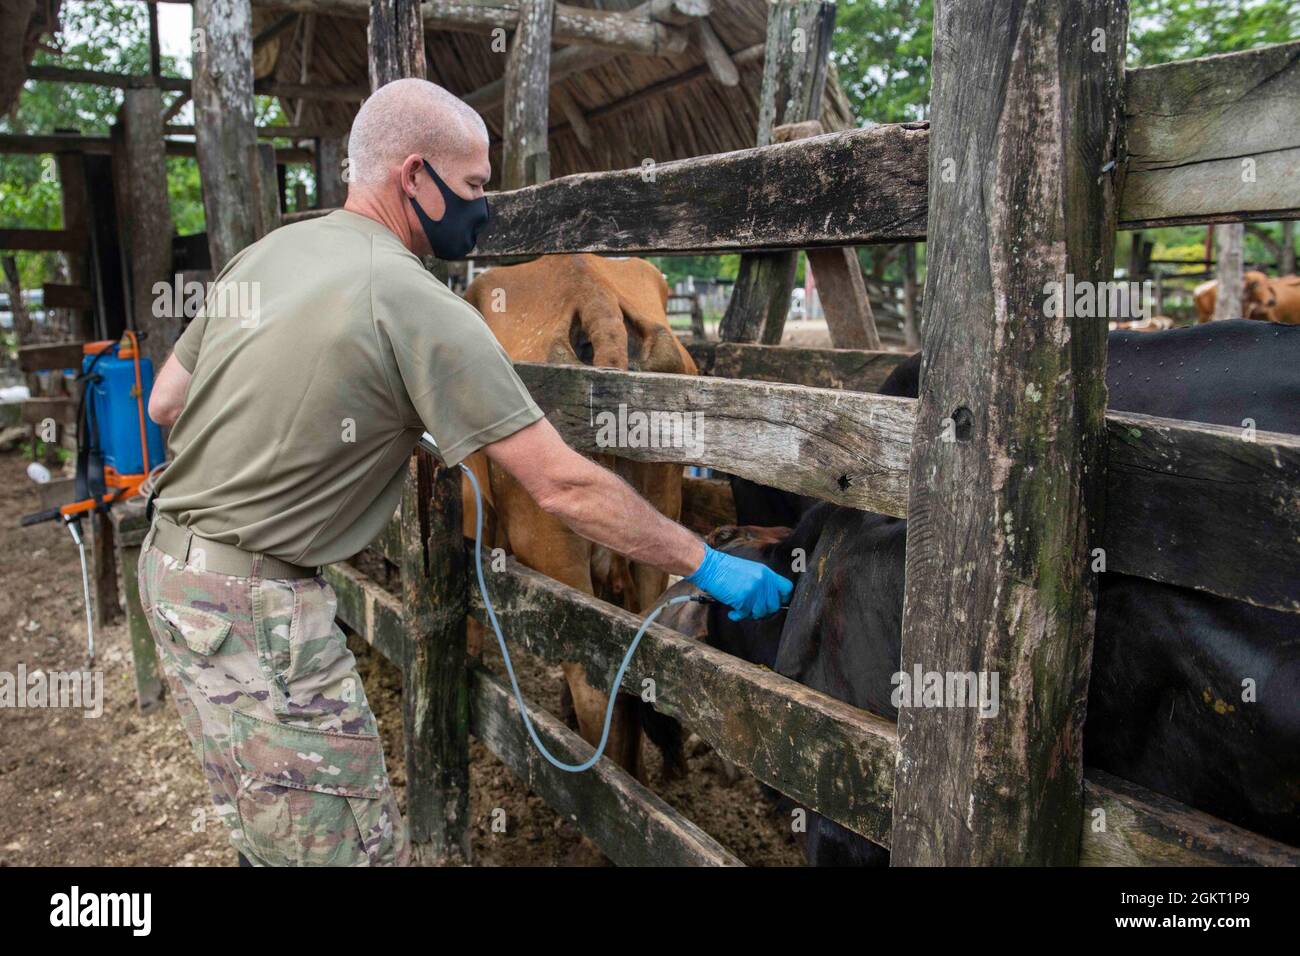 U.S. Army Maj. Matthew Conlan, a veterinarian with the 109th Medical Detachment Veterinary Services out of Garden Grove, Calif., vaccinates cattle during the Veterinary Readiness Training Exercises portion of Resolute Sentinel 21 in Melchor De Mencos, Guatemala, June 24, 2021. The vet team will provide large animal care education and vaccinations at various locations. Stock Photo